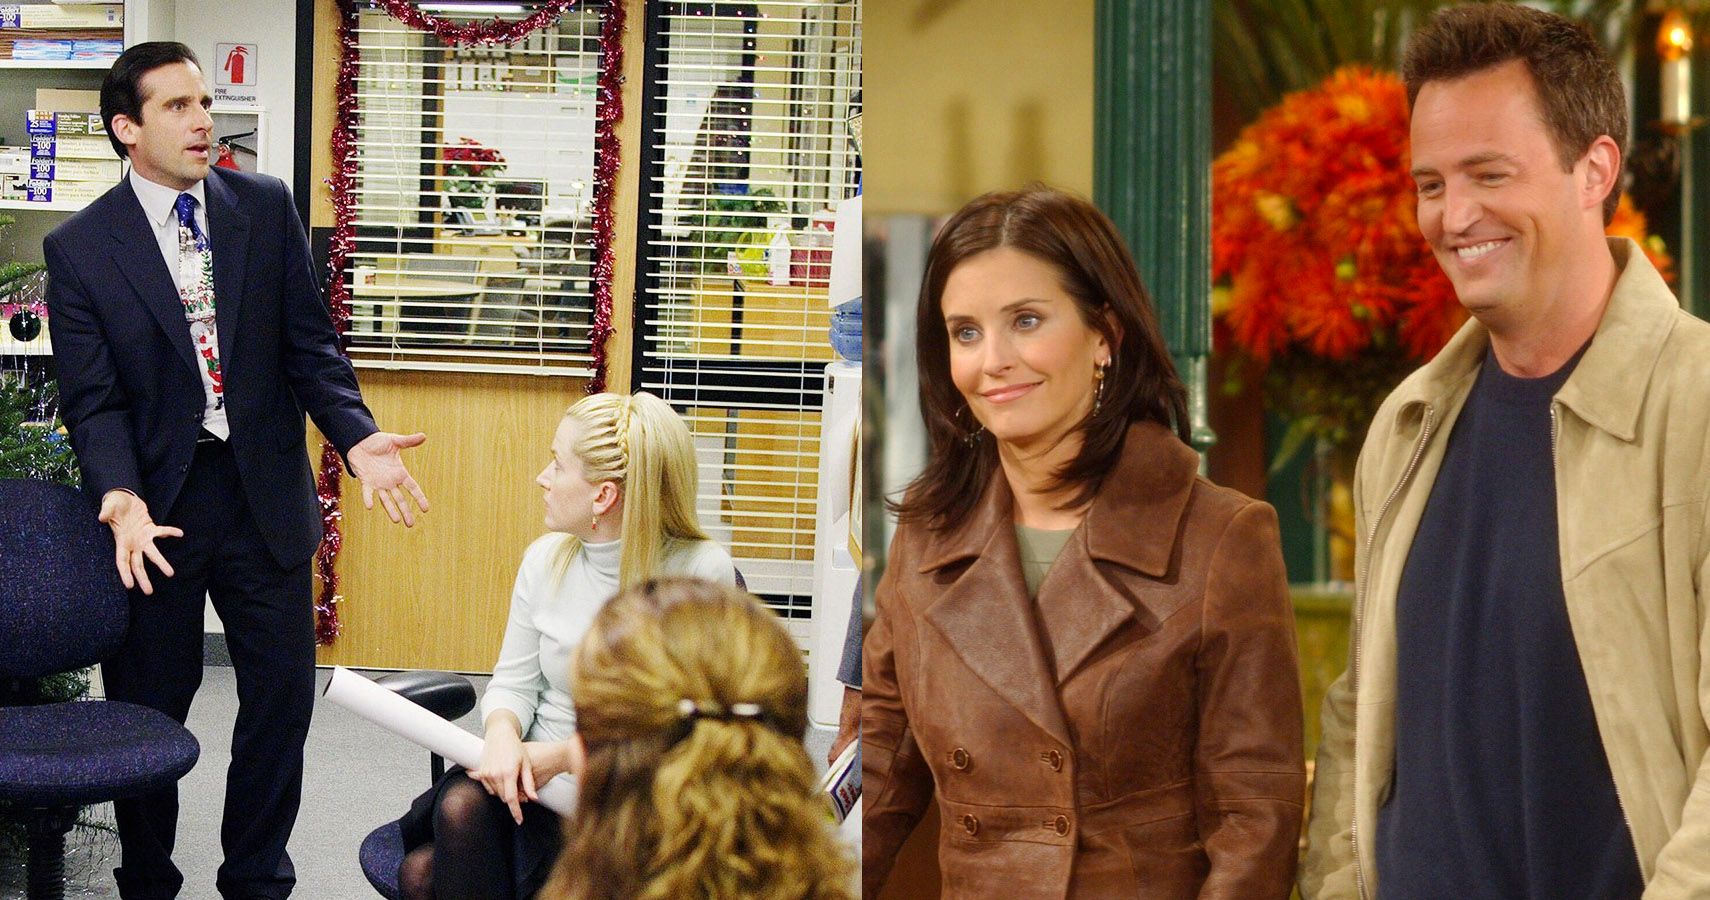 Friends Vs The Office? Which Is A Better SitCom?